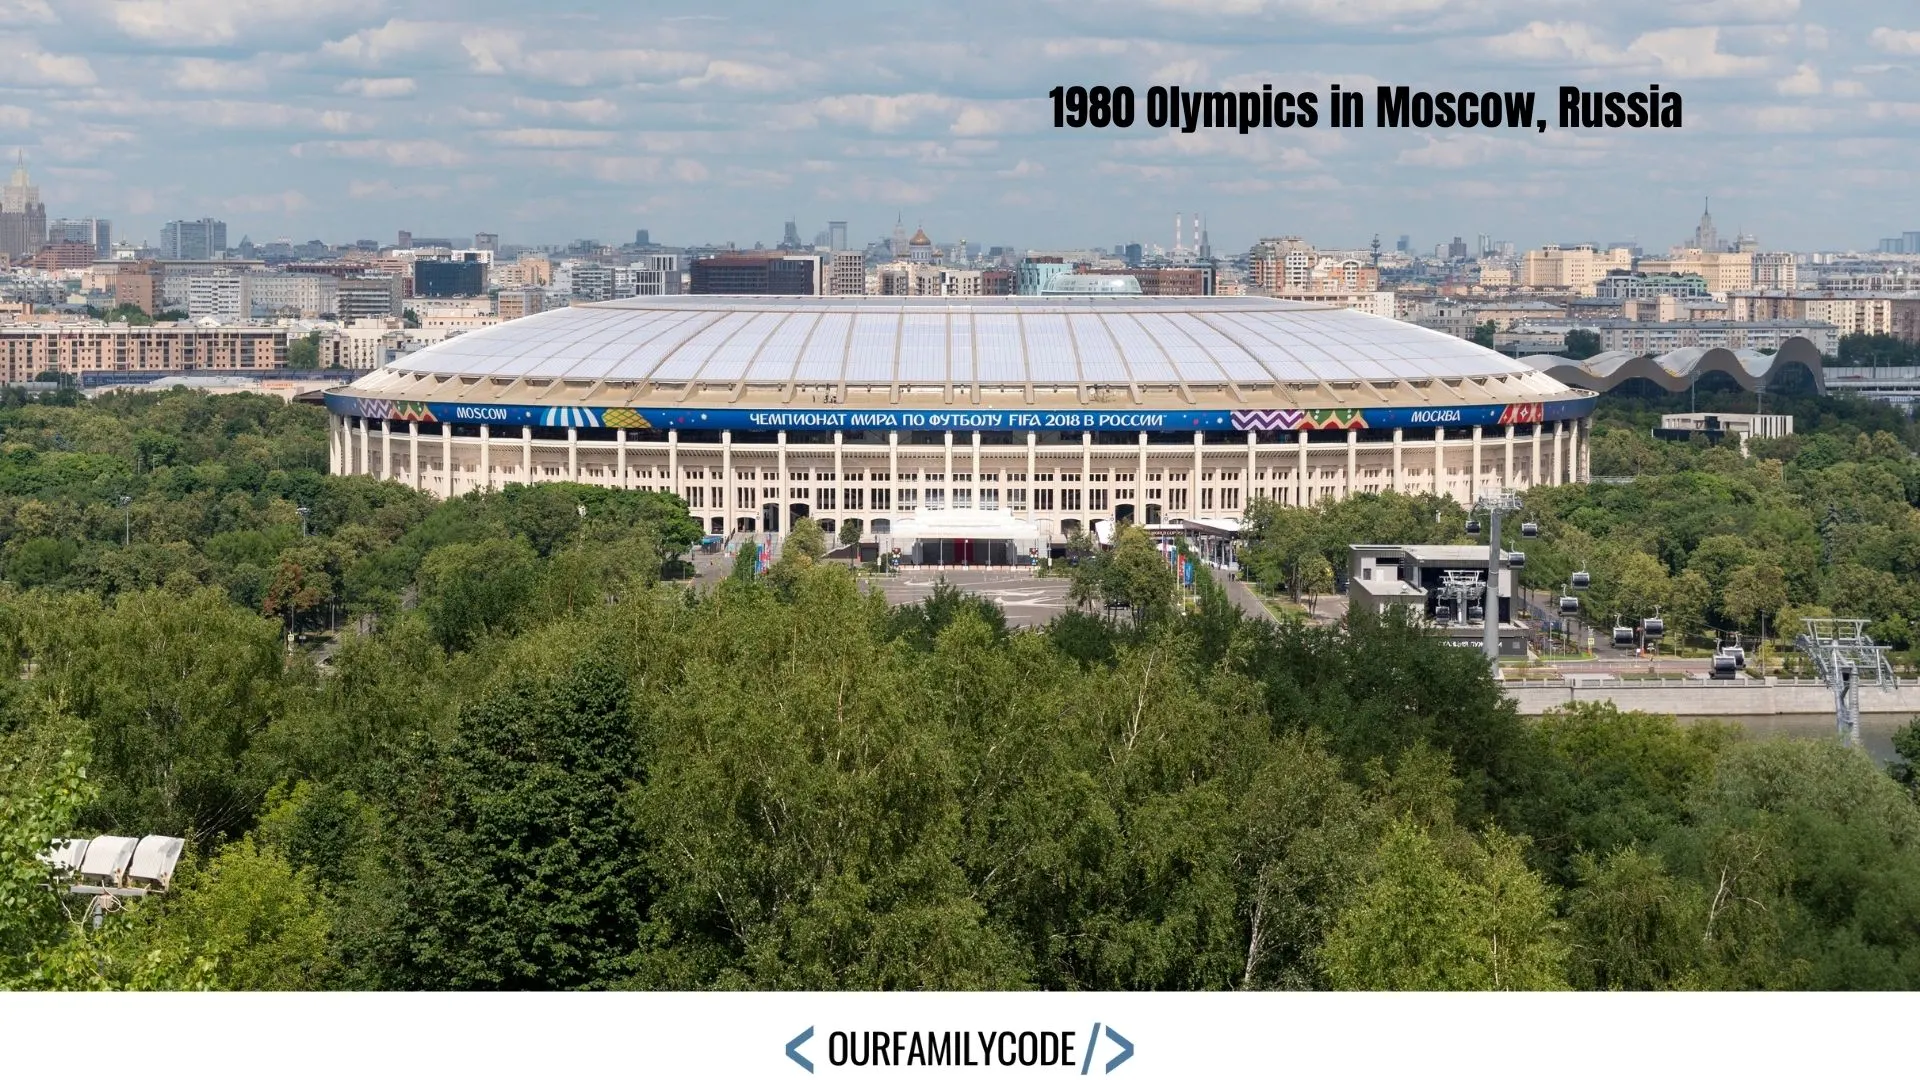 A picture of the Grand Sports Arena of the Luzhniki Olympic Complex, the main stadium of the 1980 Summer Olympic Games.